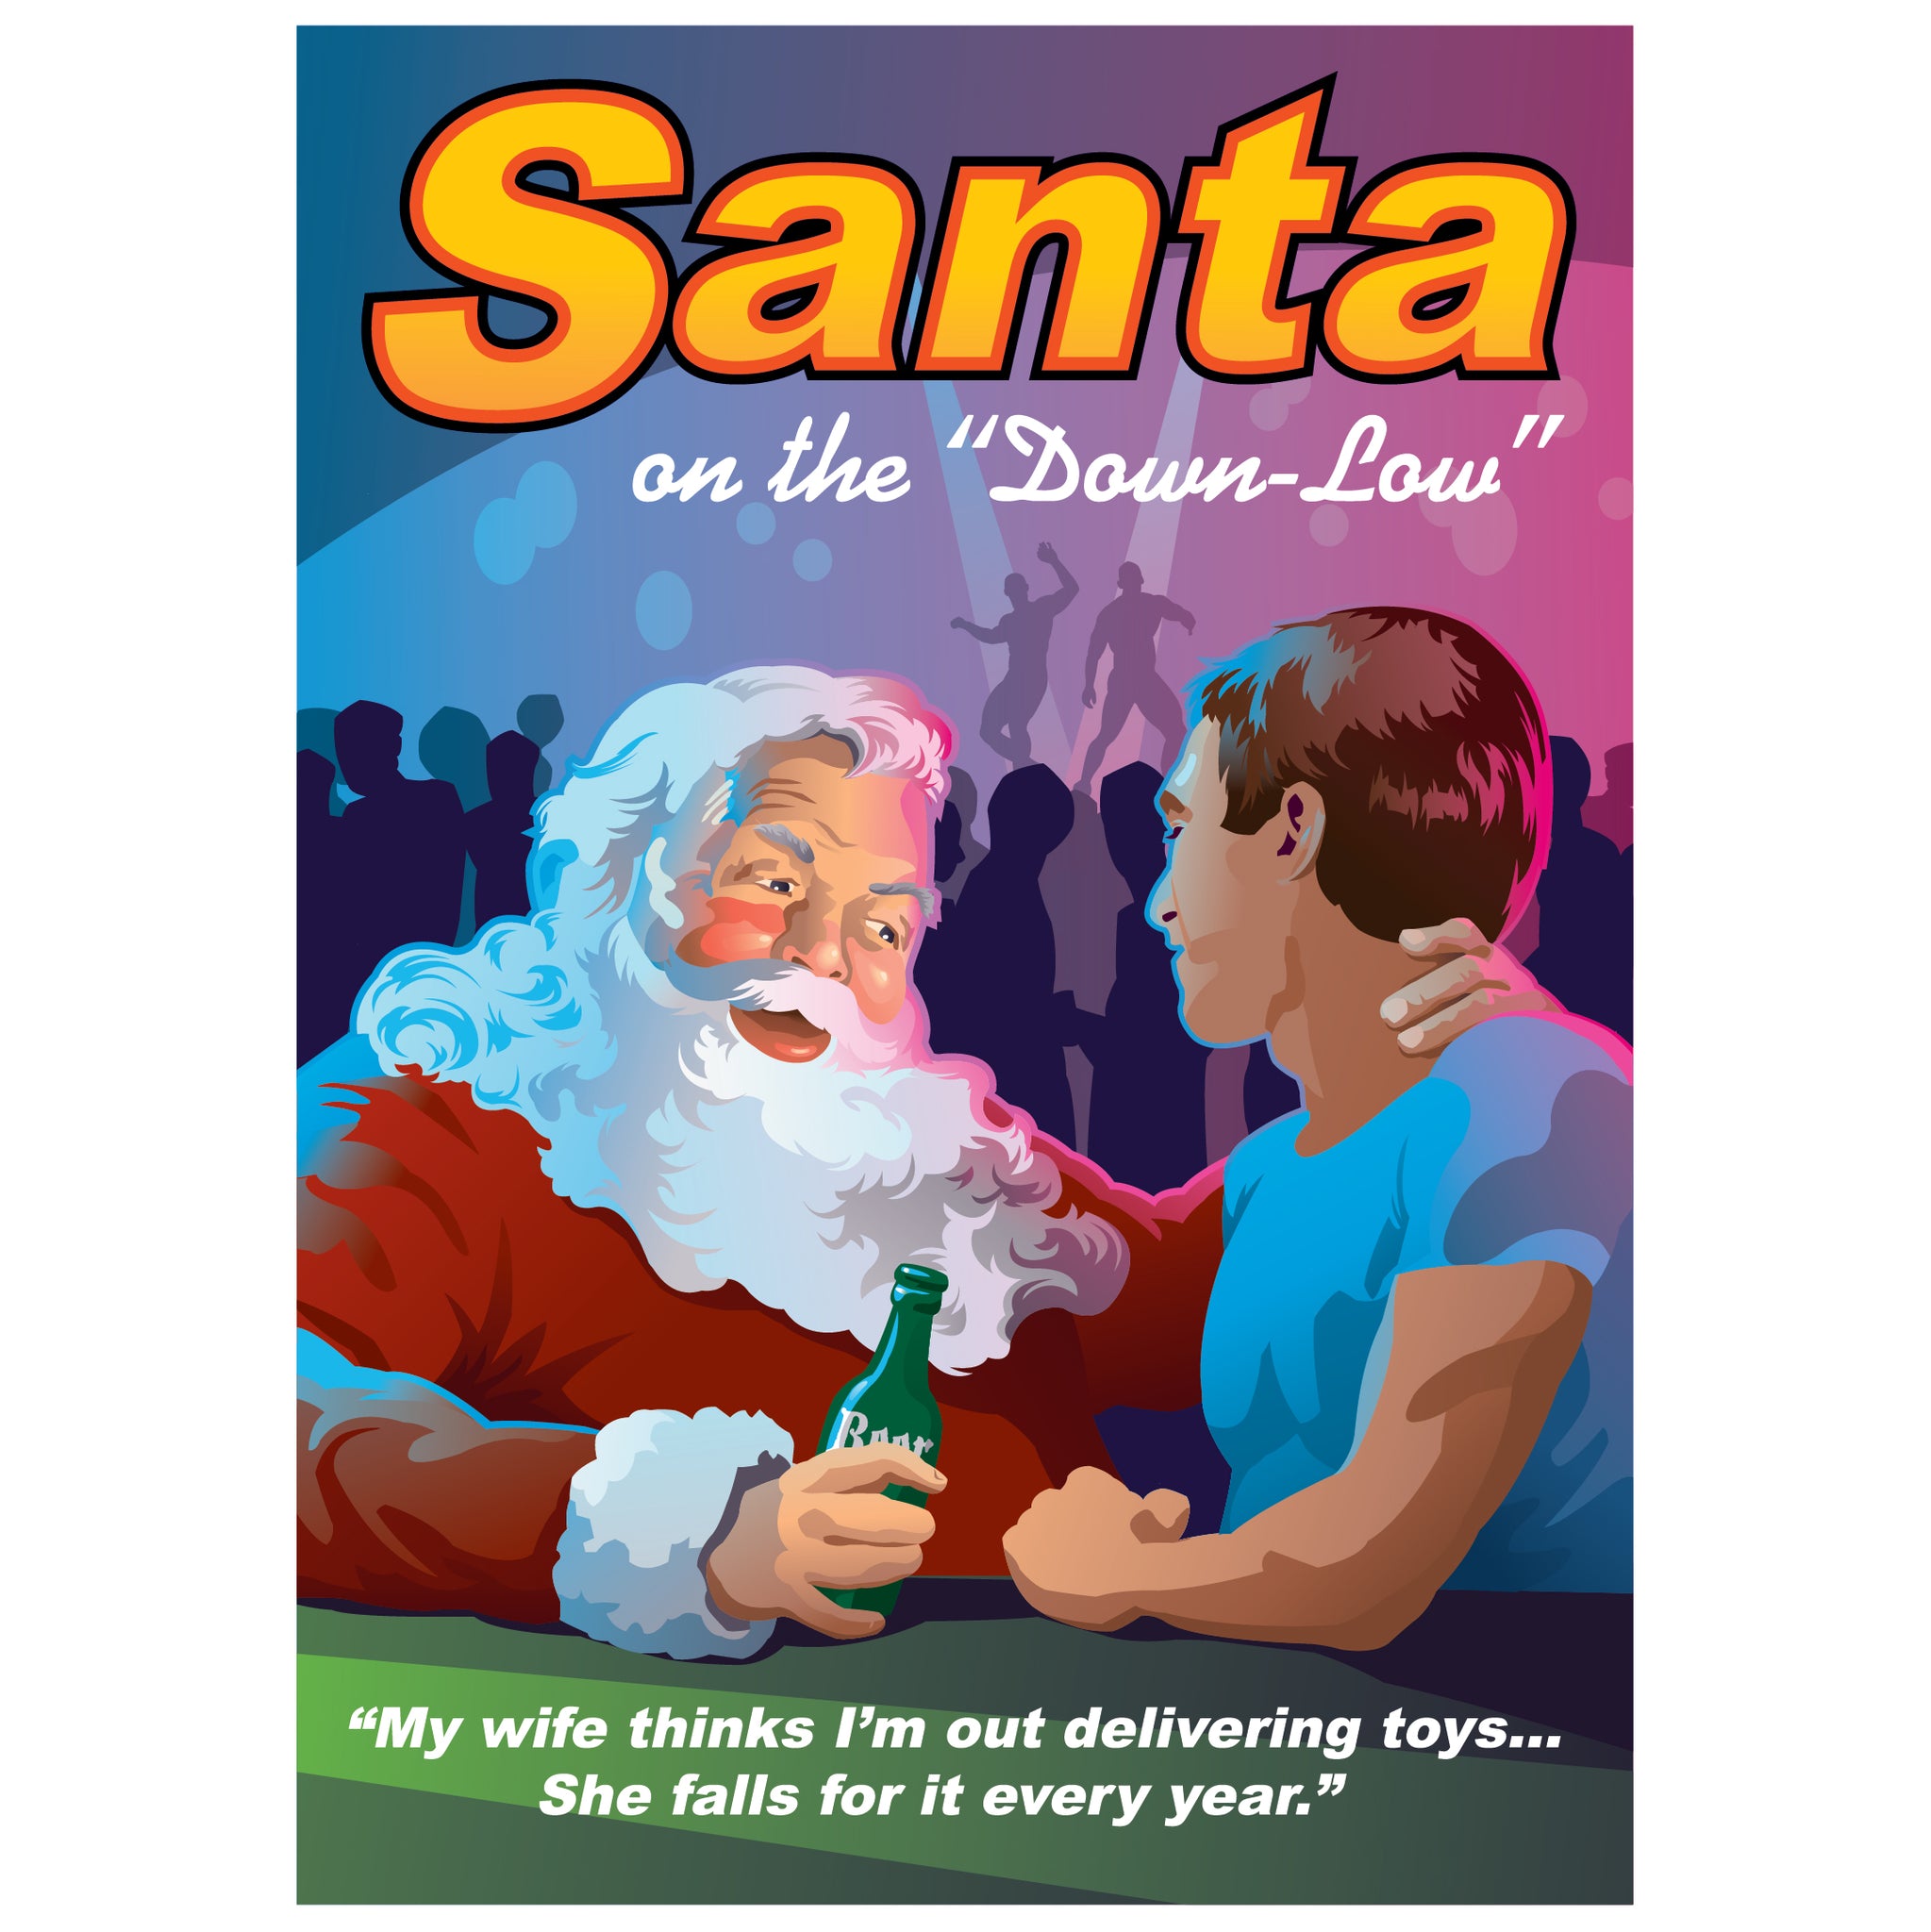 Santa on the Down-Low